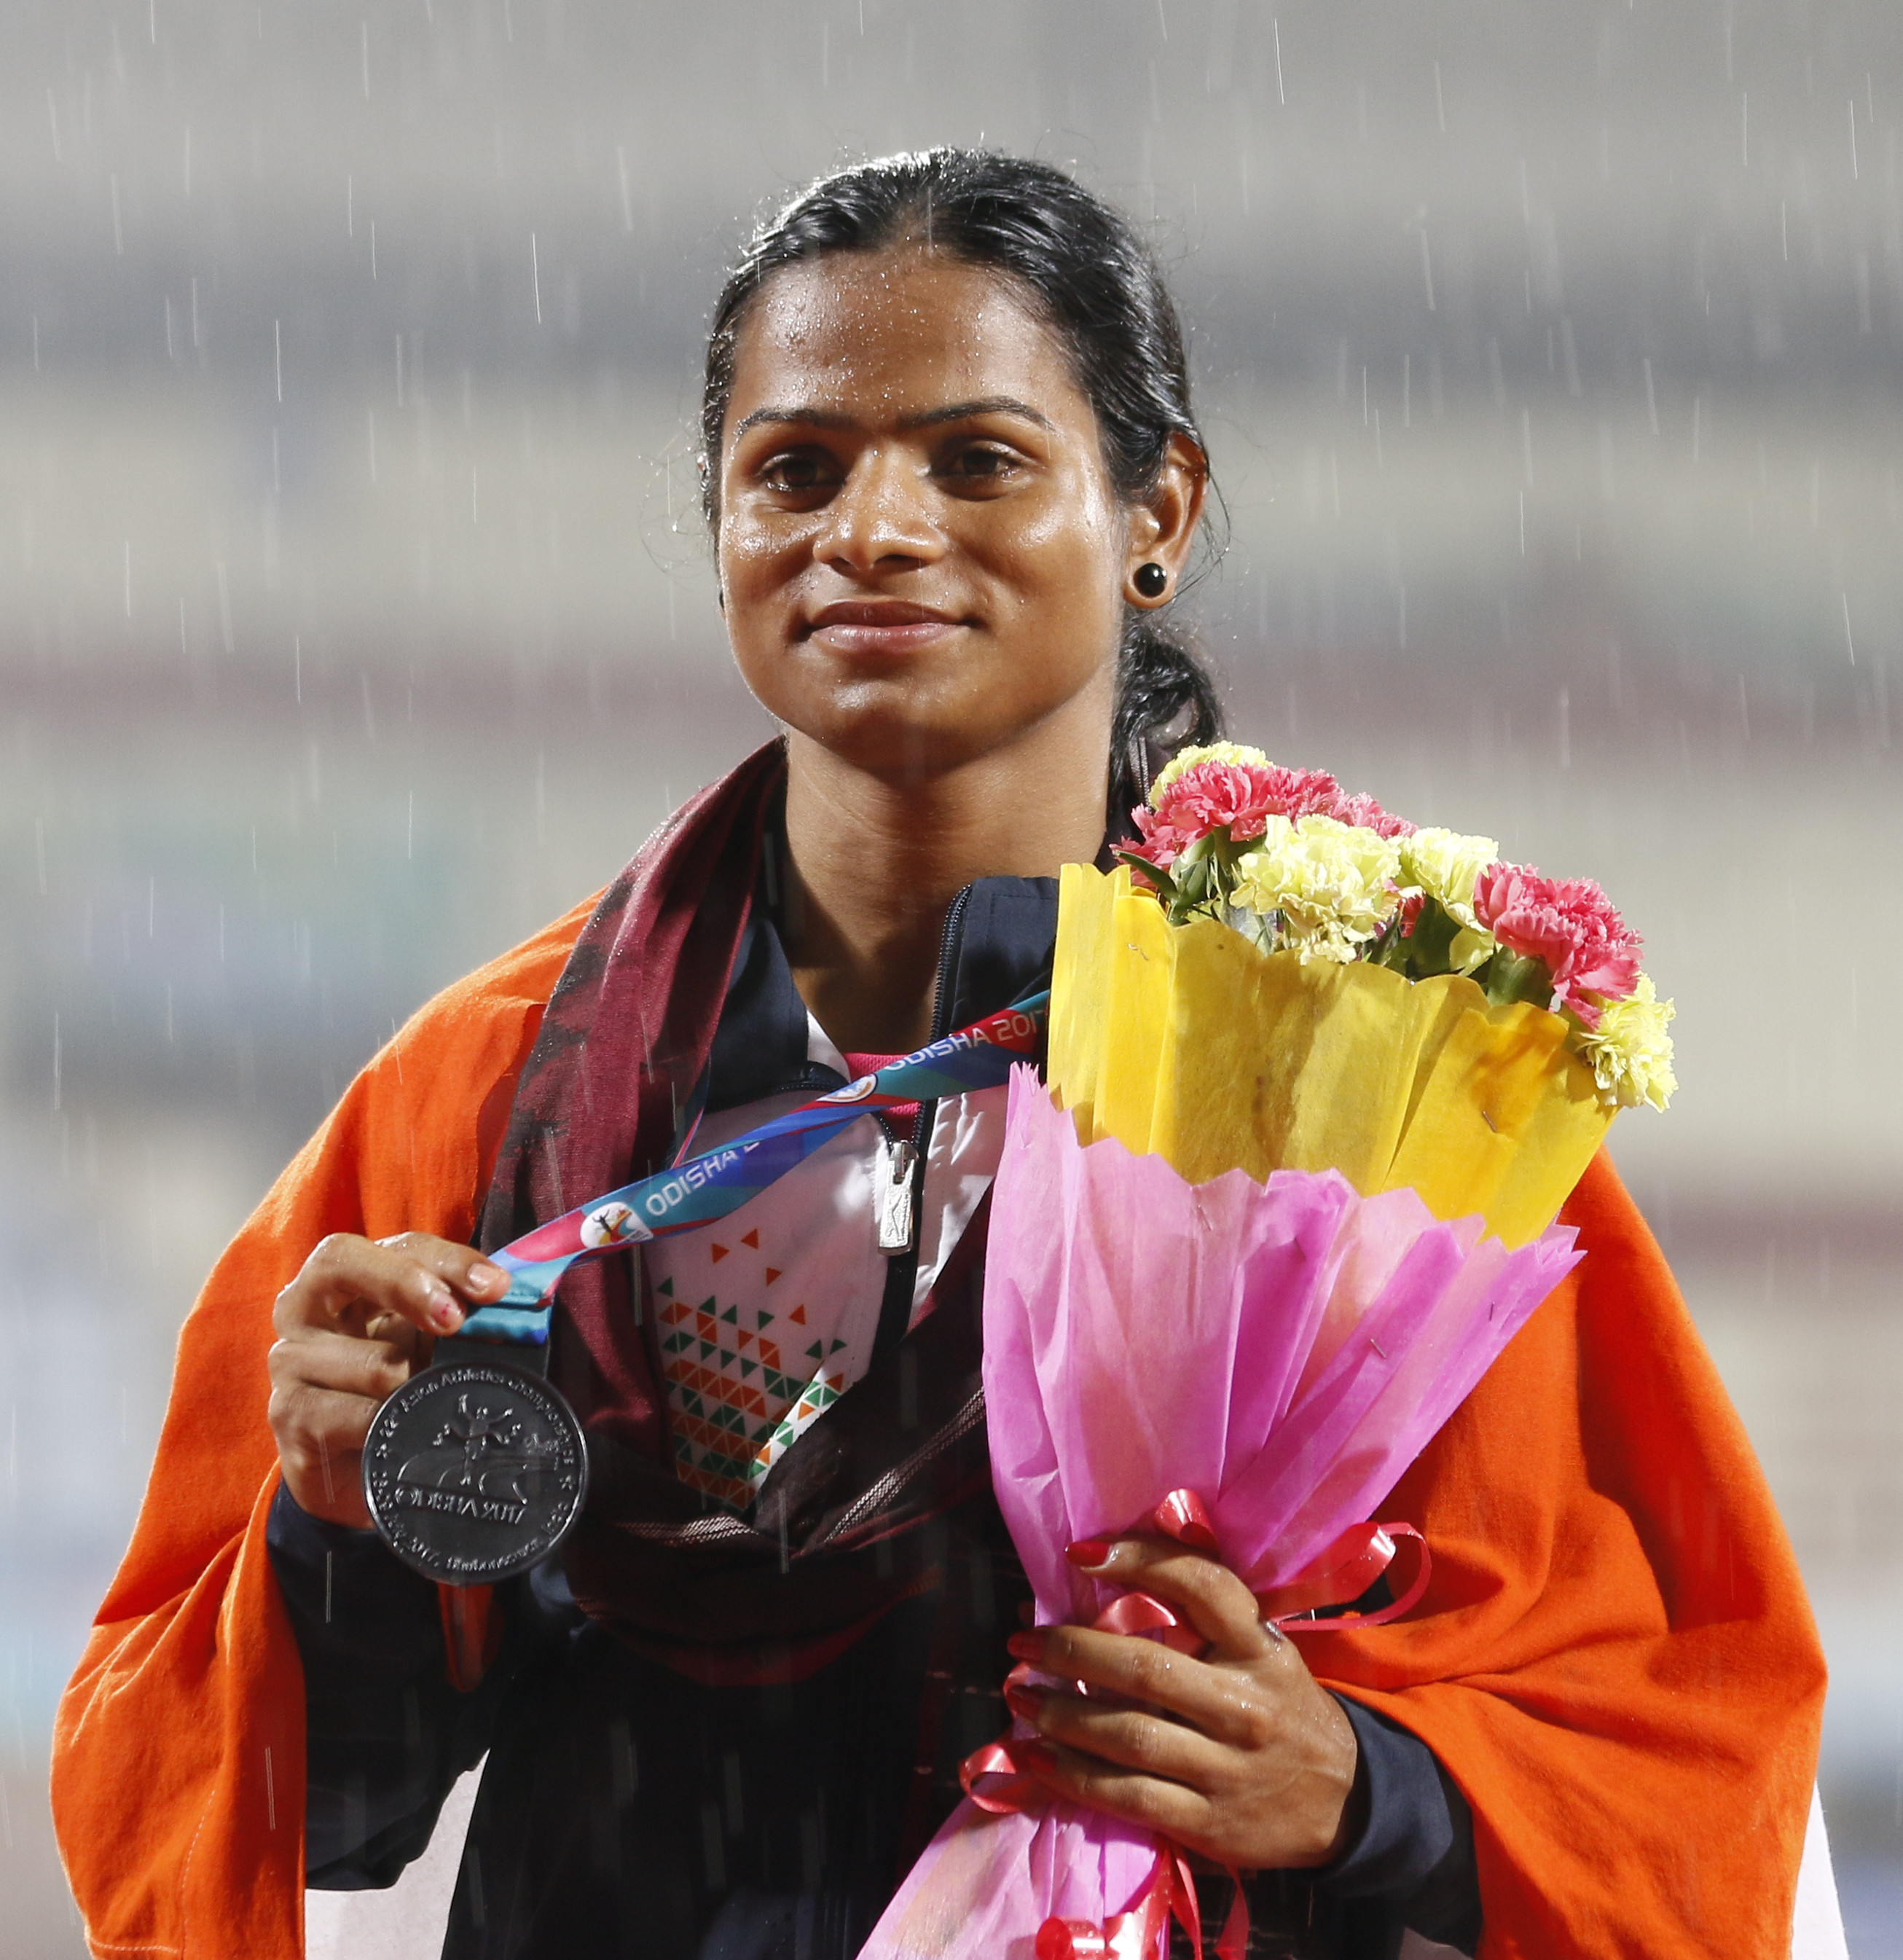 War of words broke between Odisha Government and Dutee Chand over financial support given to athlete over the years 